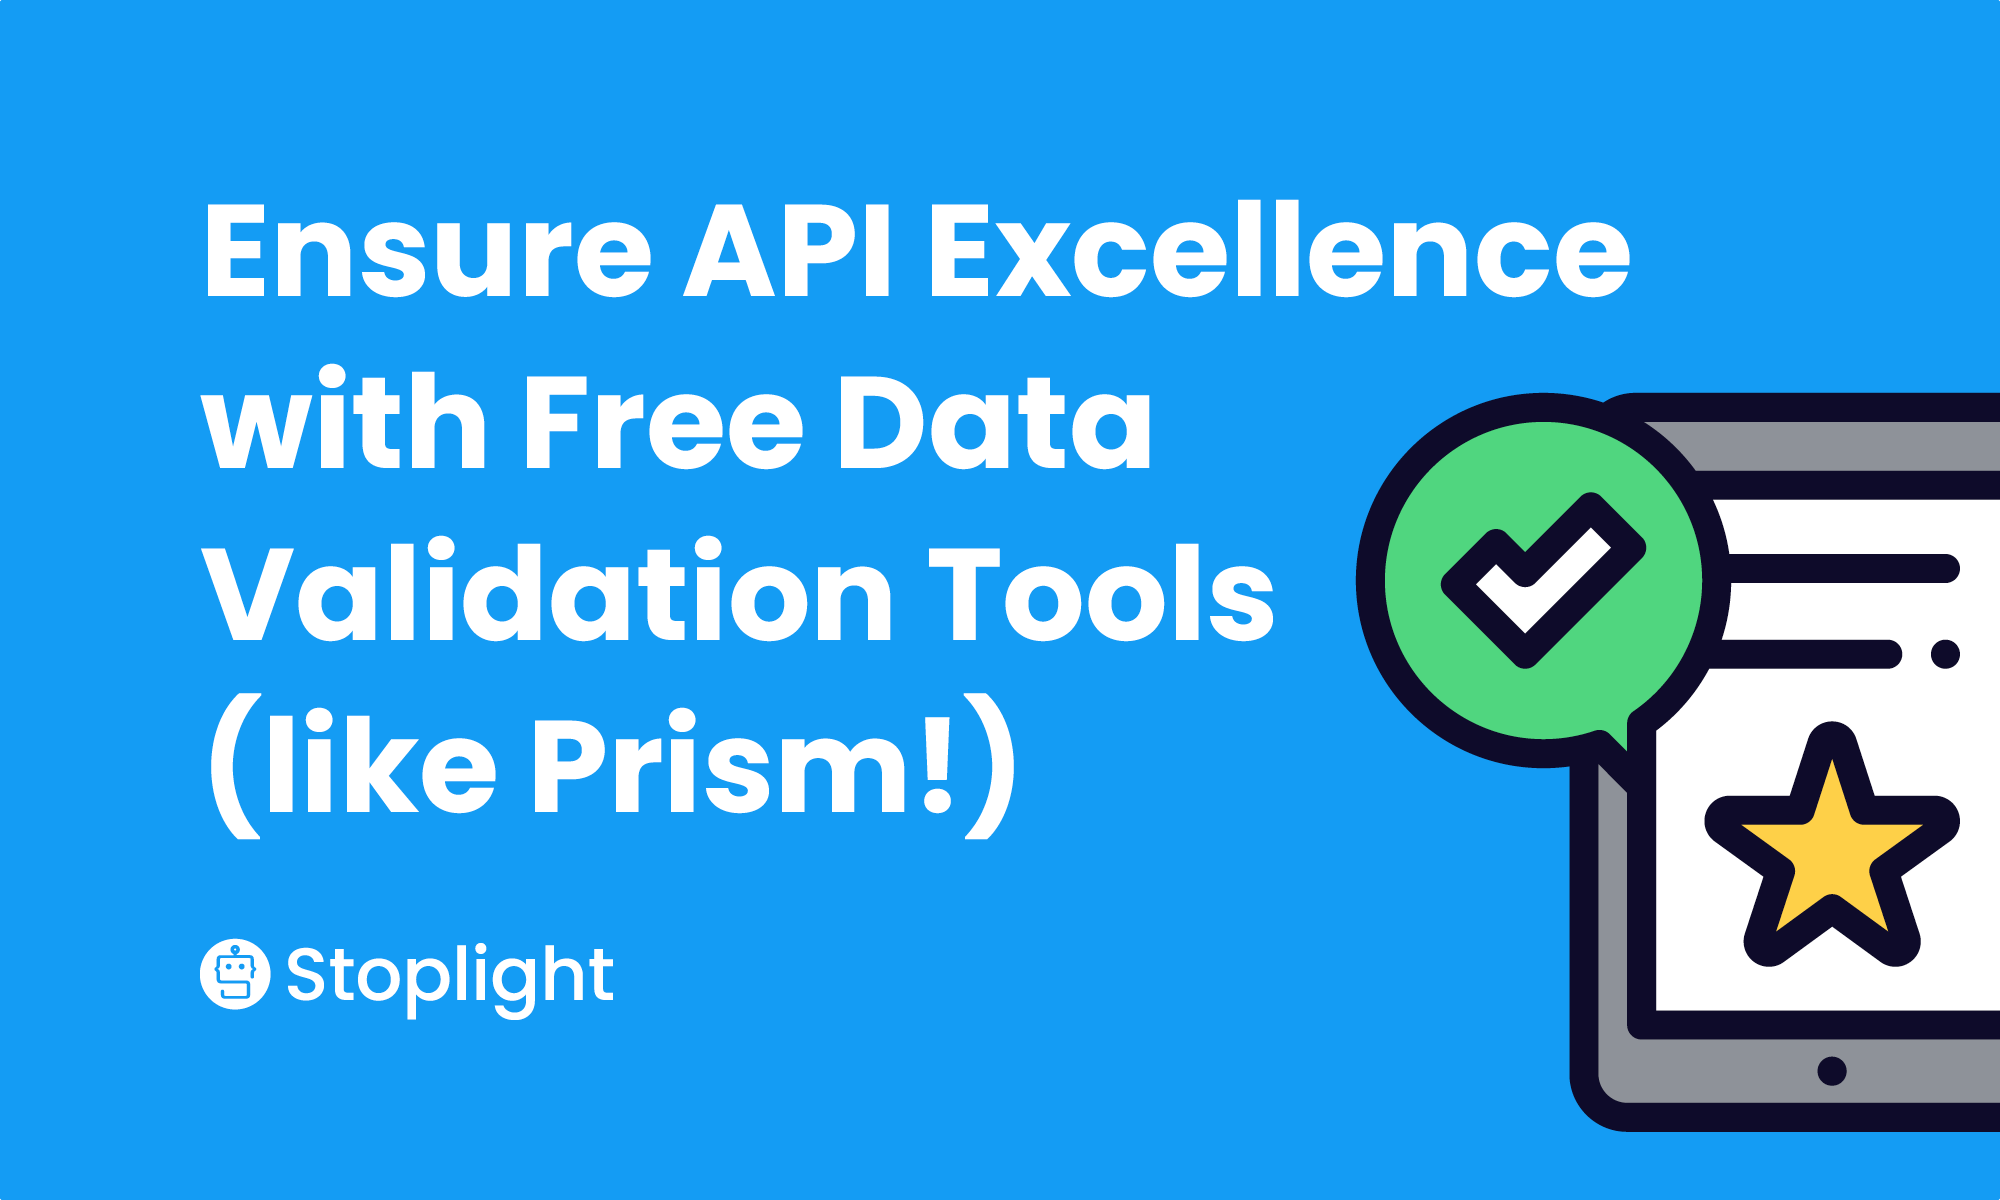 Ensure API Excellence with Free Data Validation Tools (like Prism!)